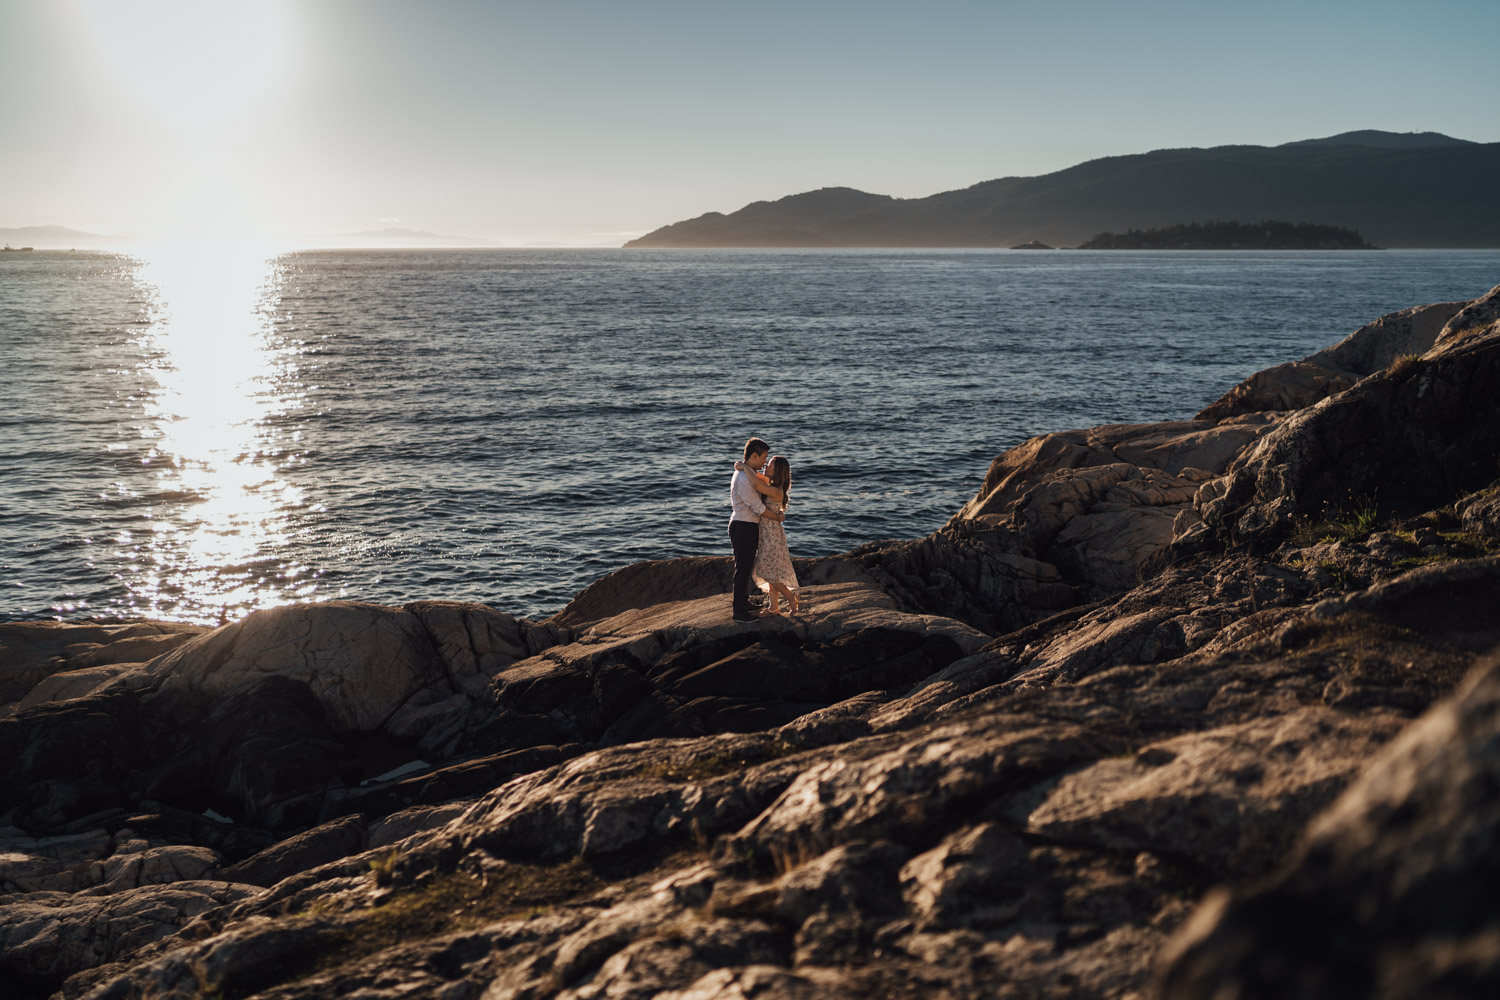 west vancouver engagement photography at lighthouse park during a summer sunset film